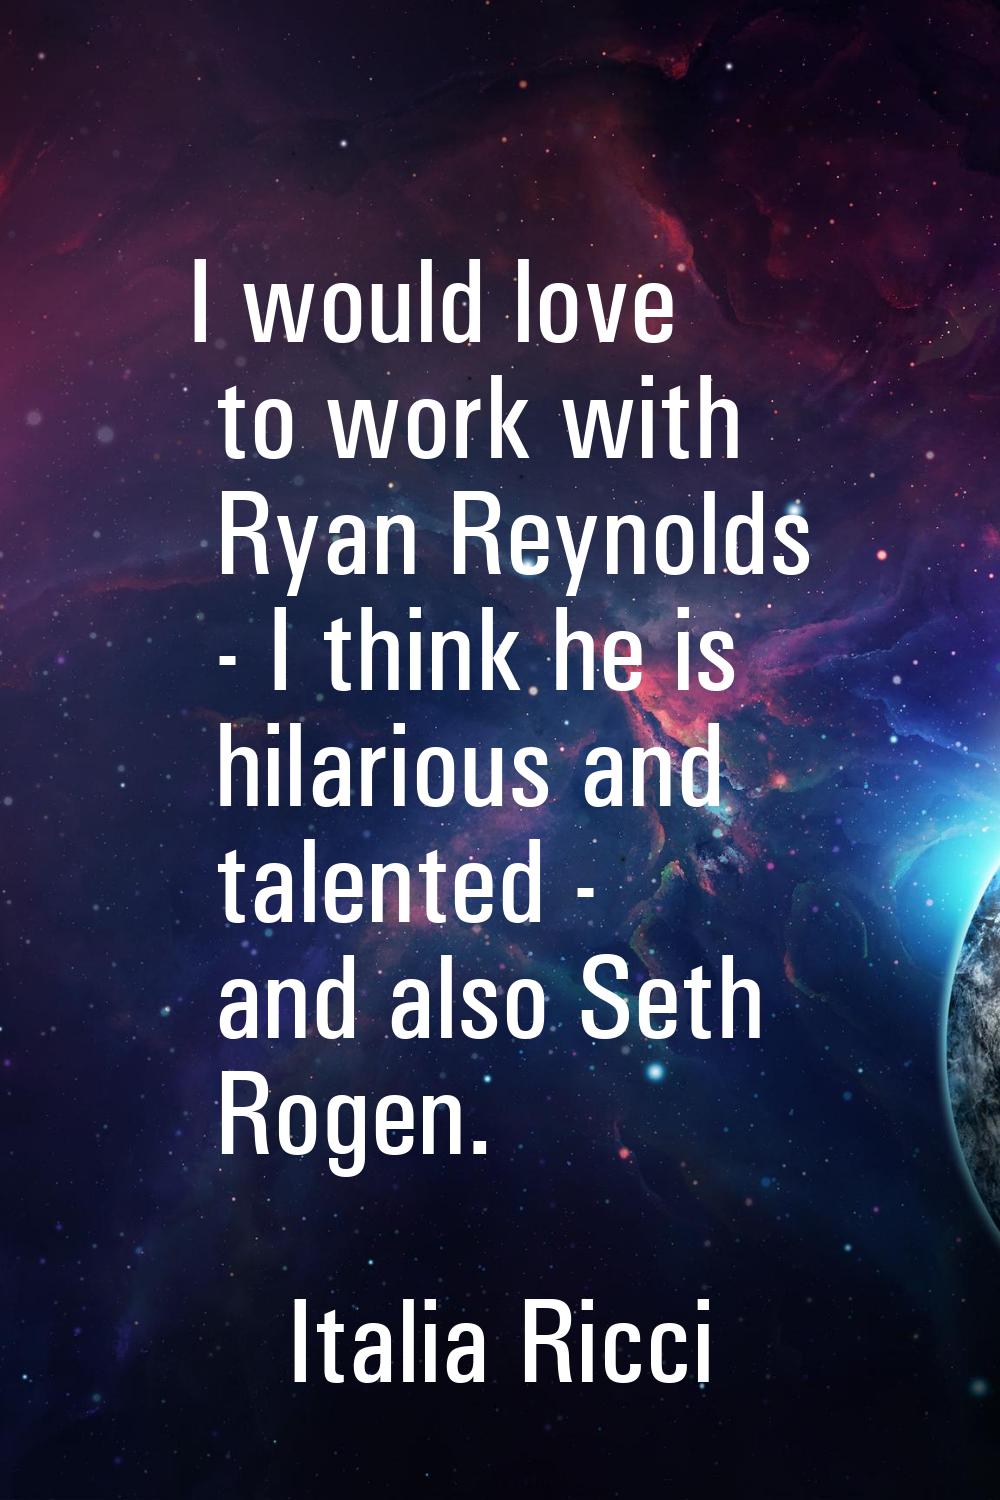 I would love to work with Ryan Reynolds - I think he is hilarious and talented - and also Seth Roge